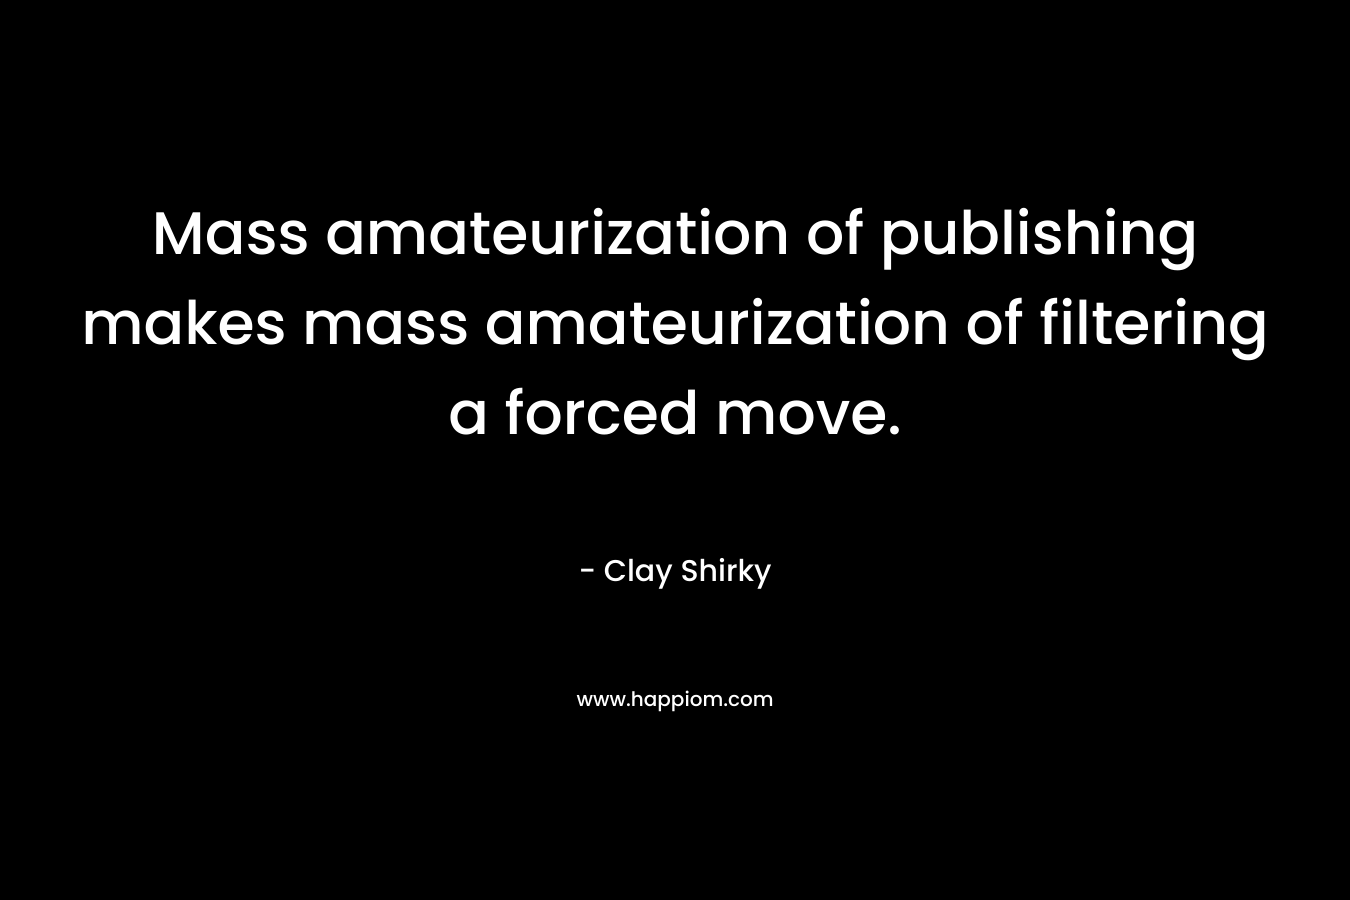 Mass amateurization of publishing makes mass amateurization of filtering a forced move.